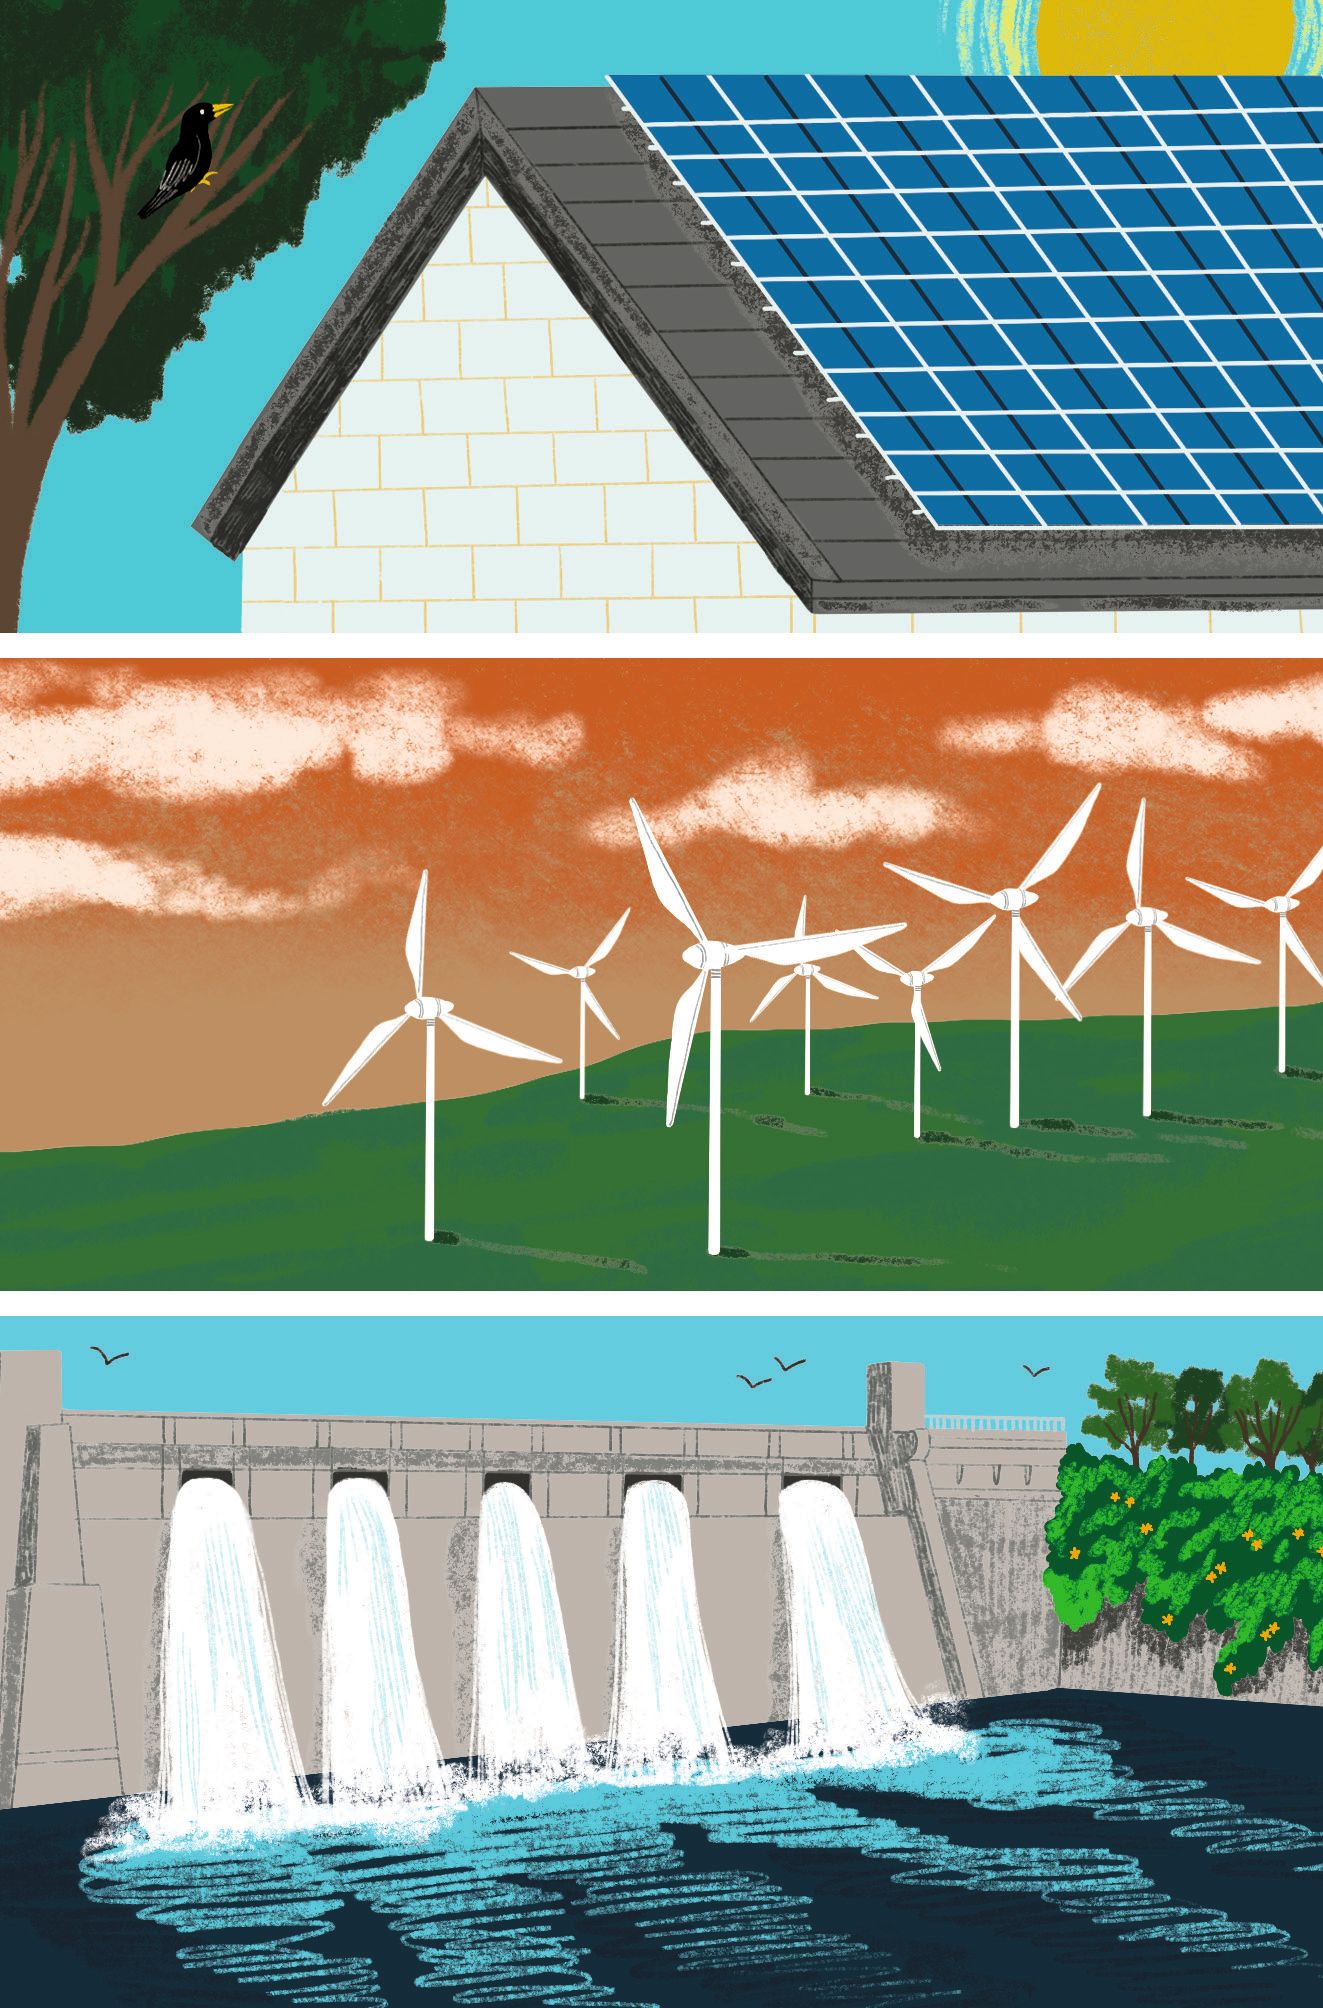 Illustrations of solar panels on a roof, a windfarm, a hydroelectic dam